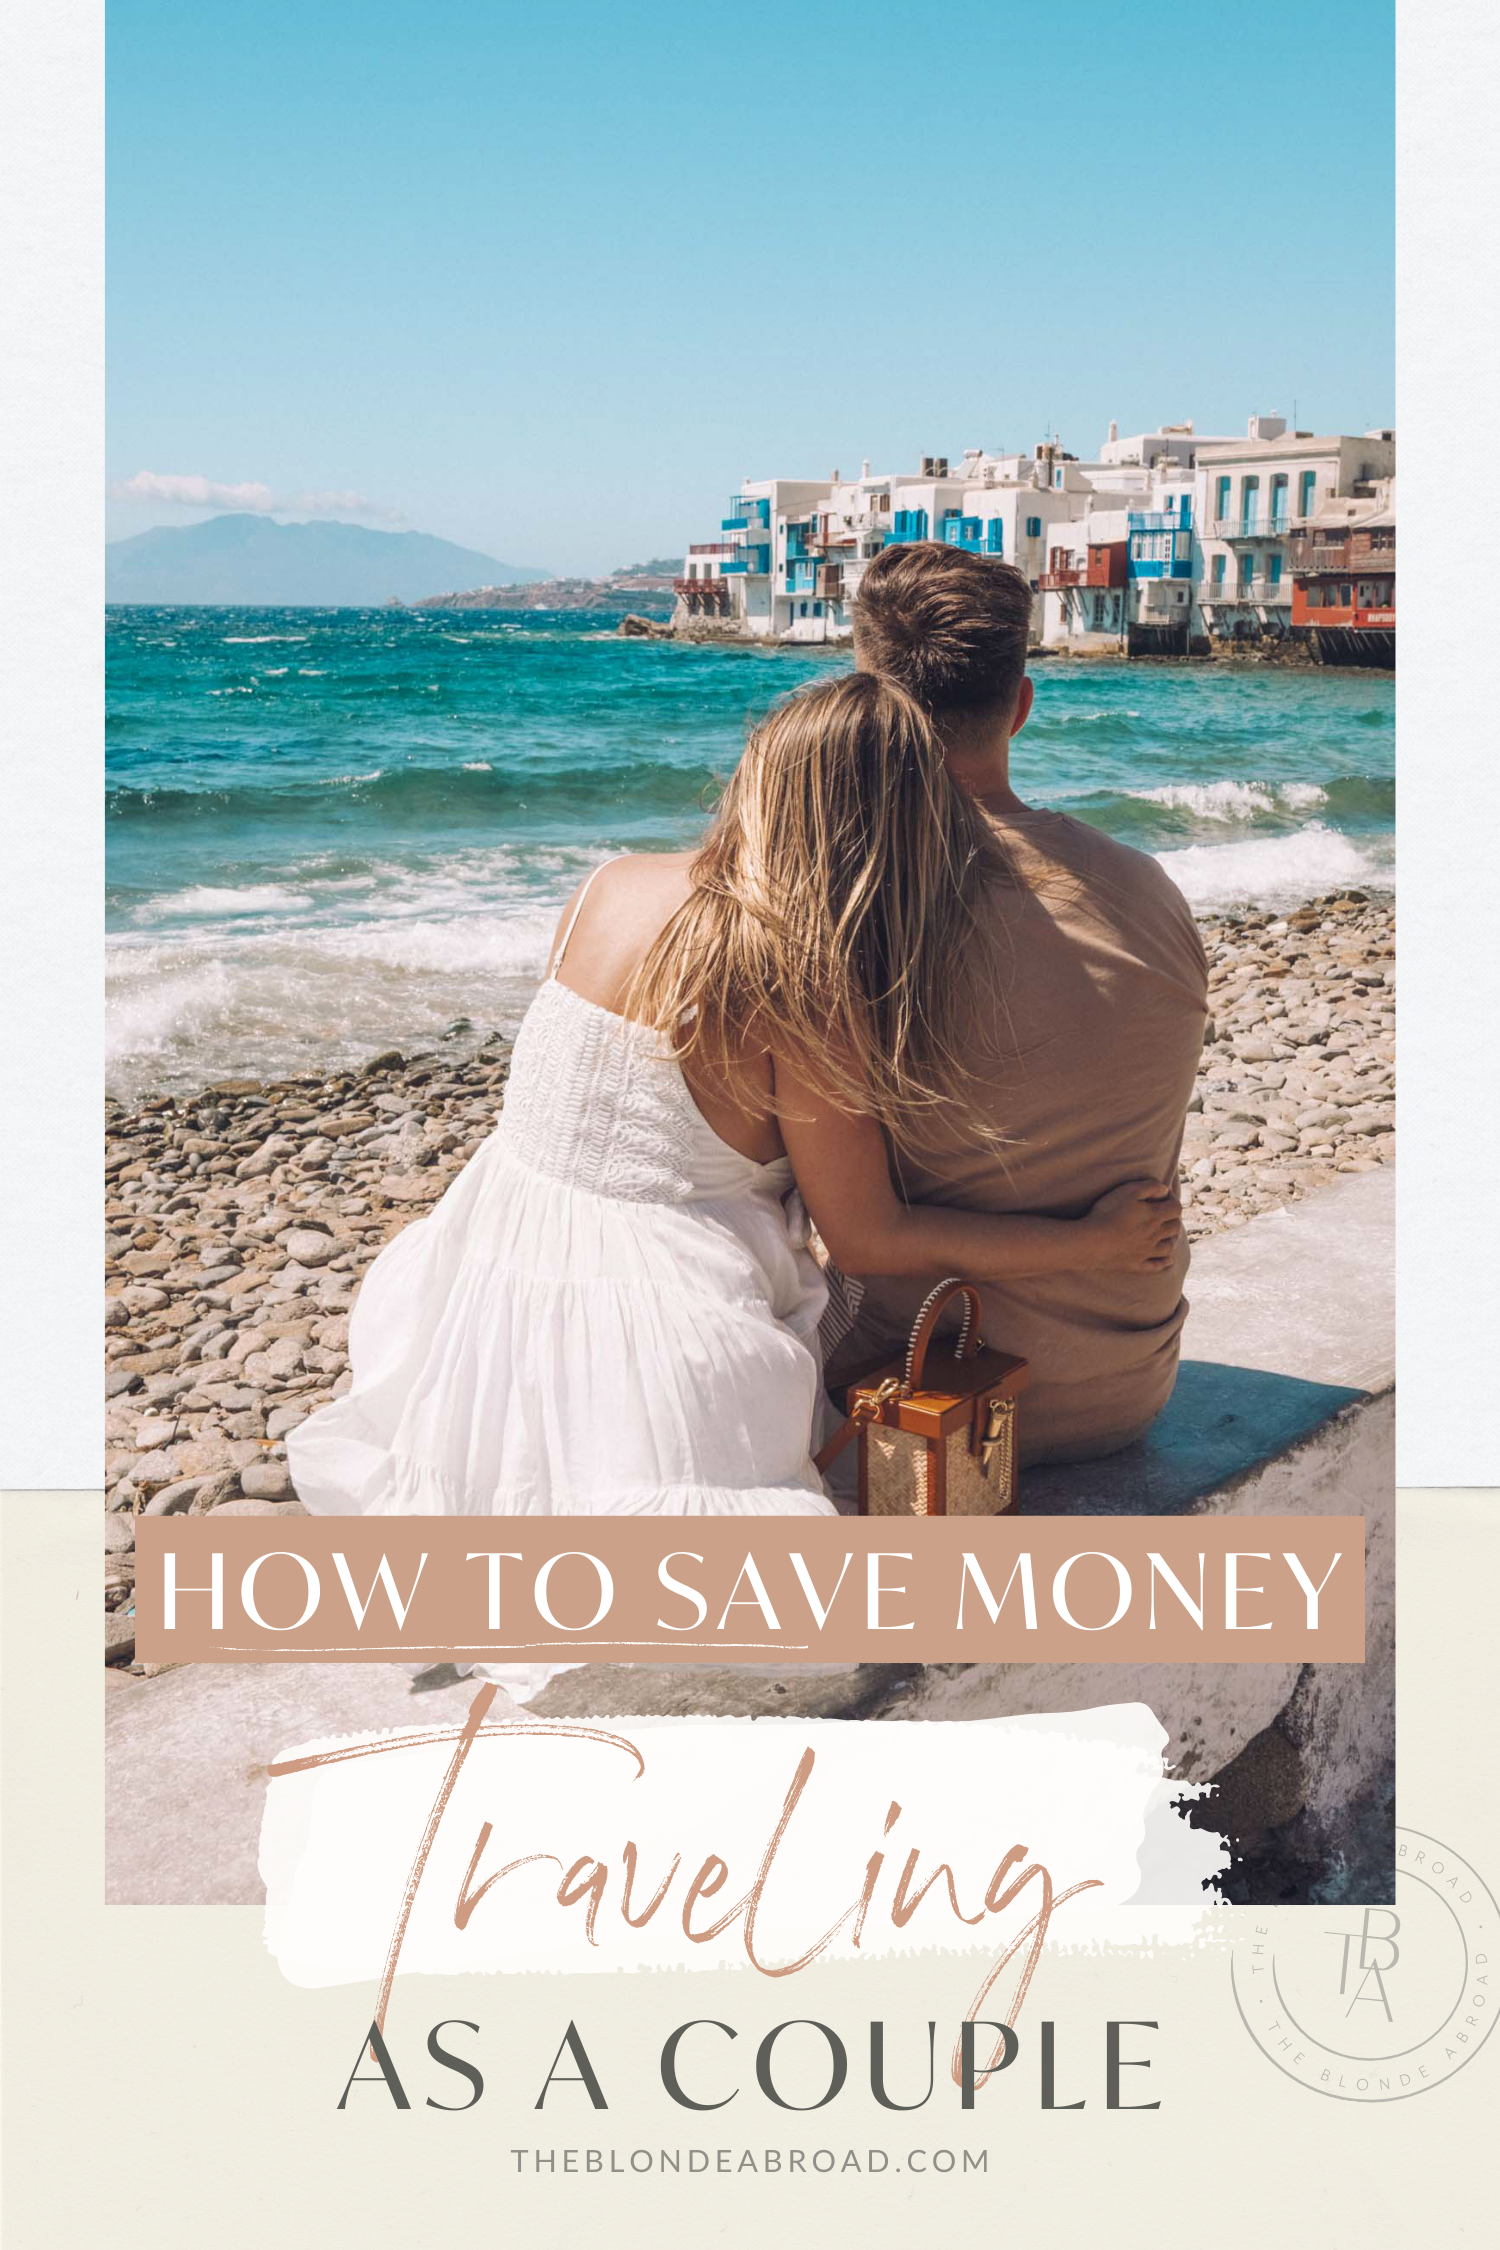 10 Tips to Save Money While Traveling as a Couple